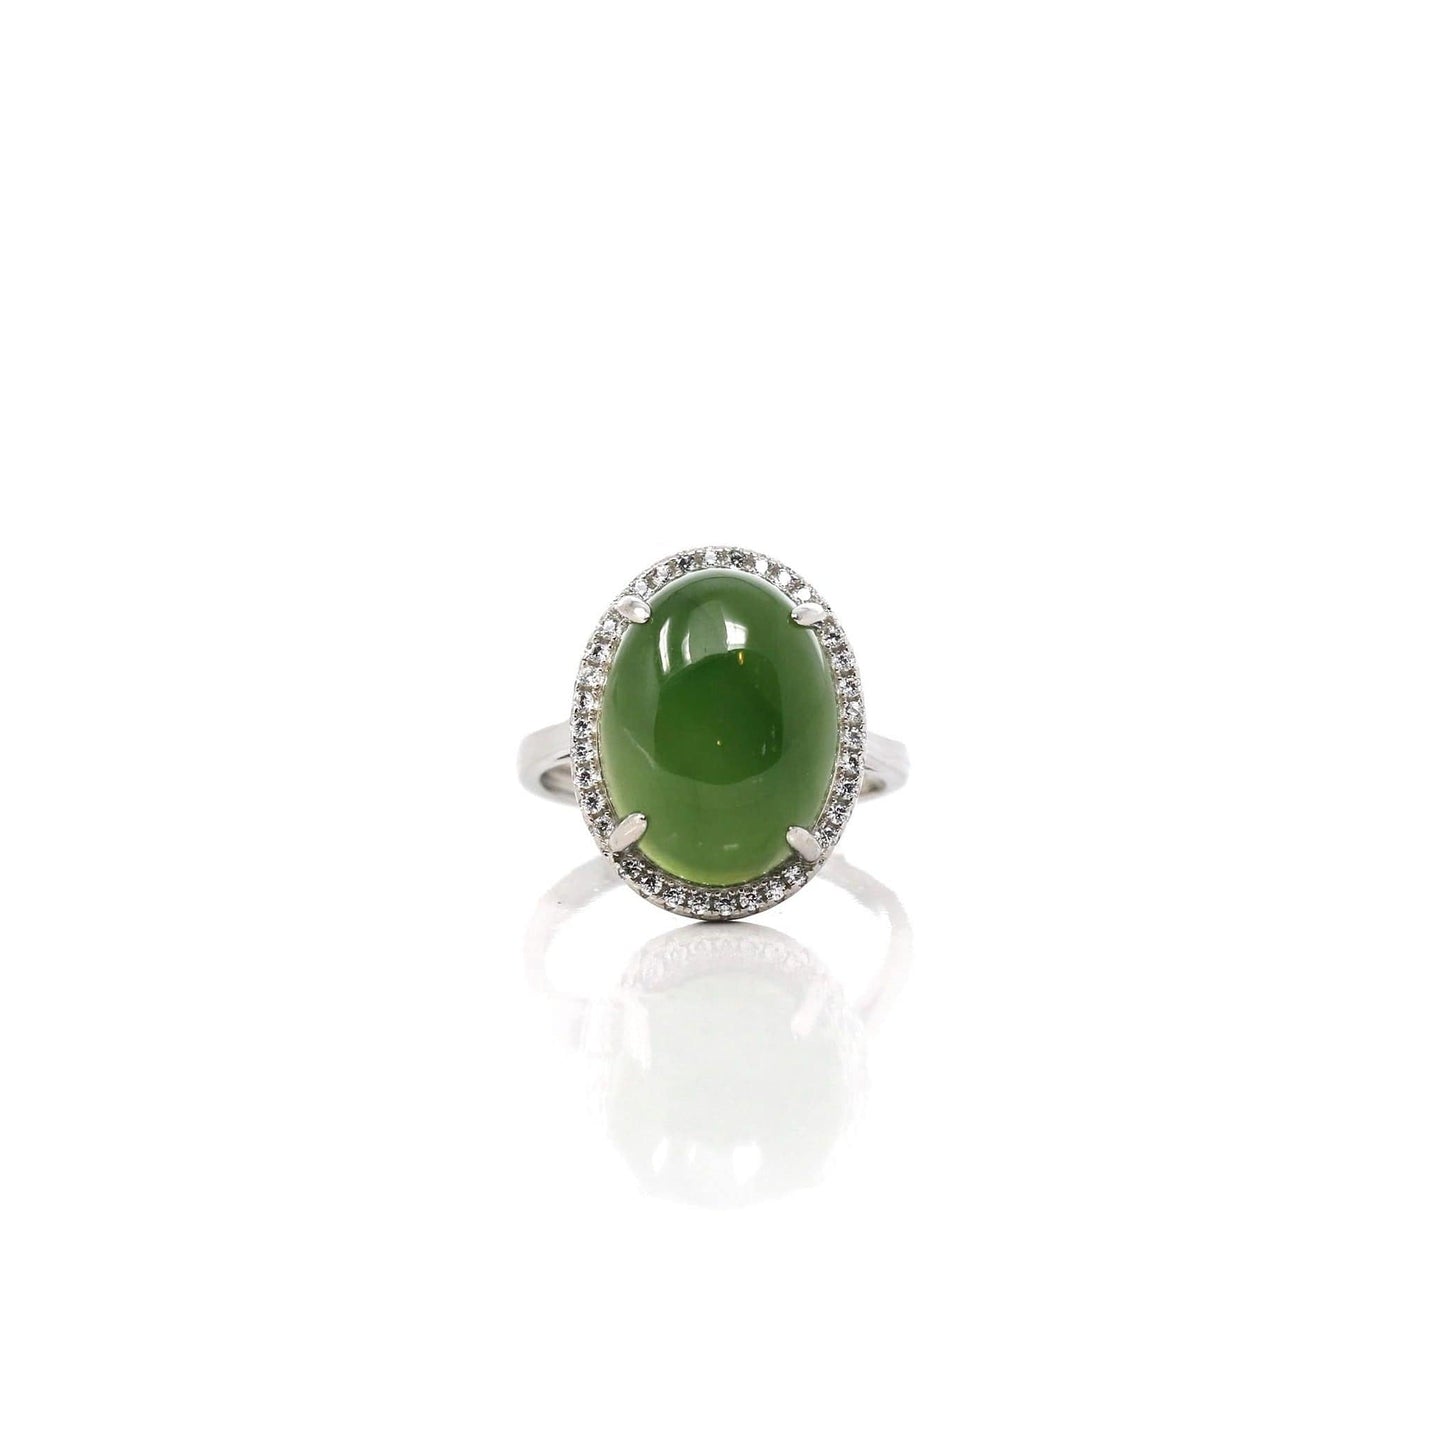 RealJade® Co. Jade Ring  RealJade® Co. "Classic Oval With Accents" Sterling Silver Real Green Nephrite Jade Classic Ring For Her